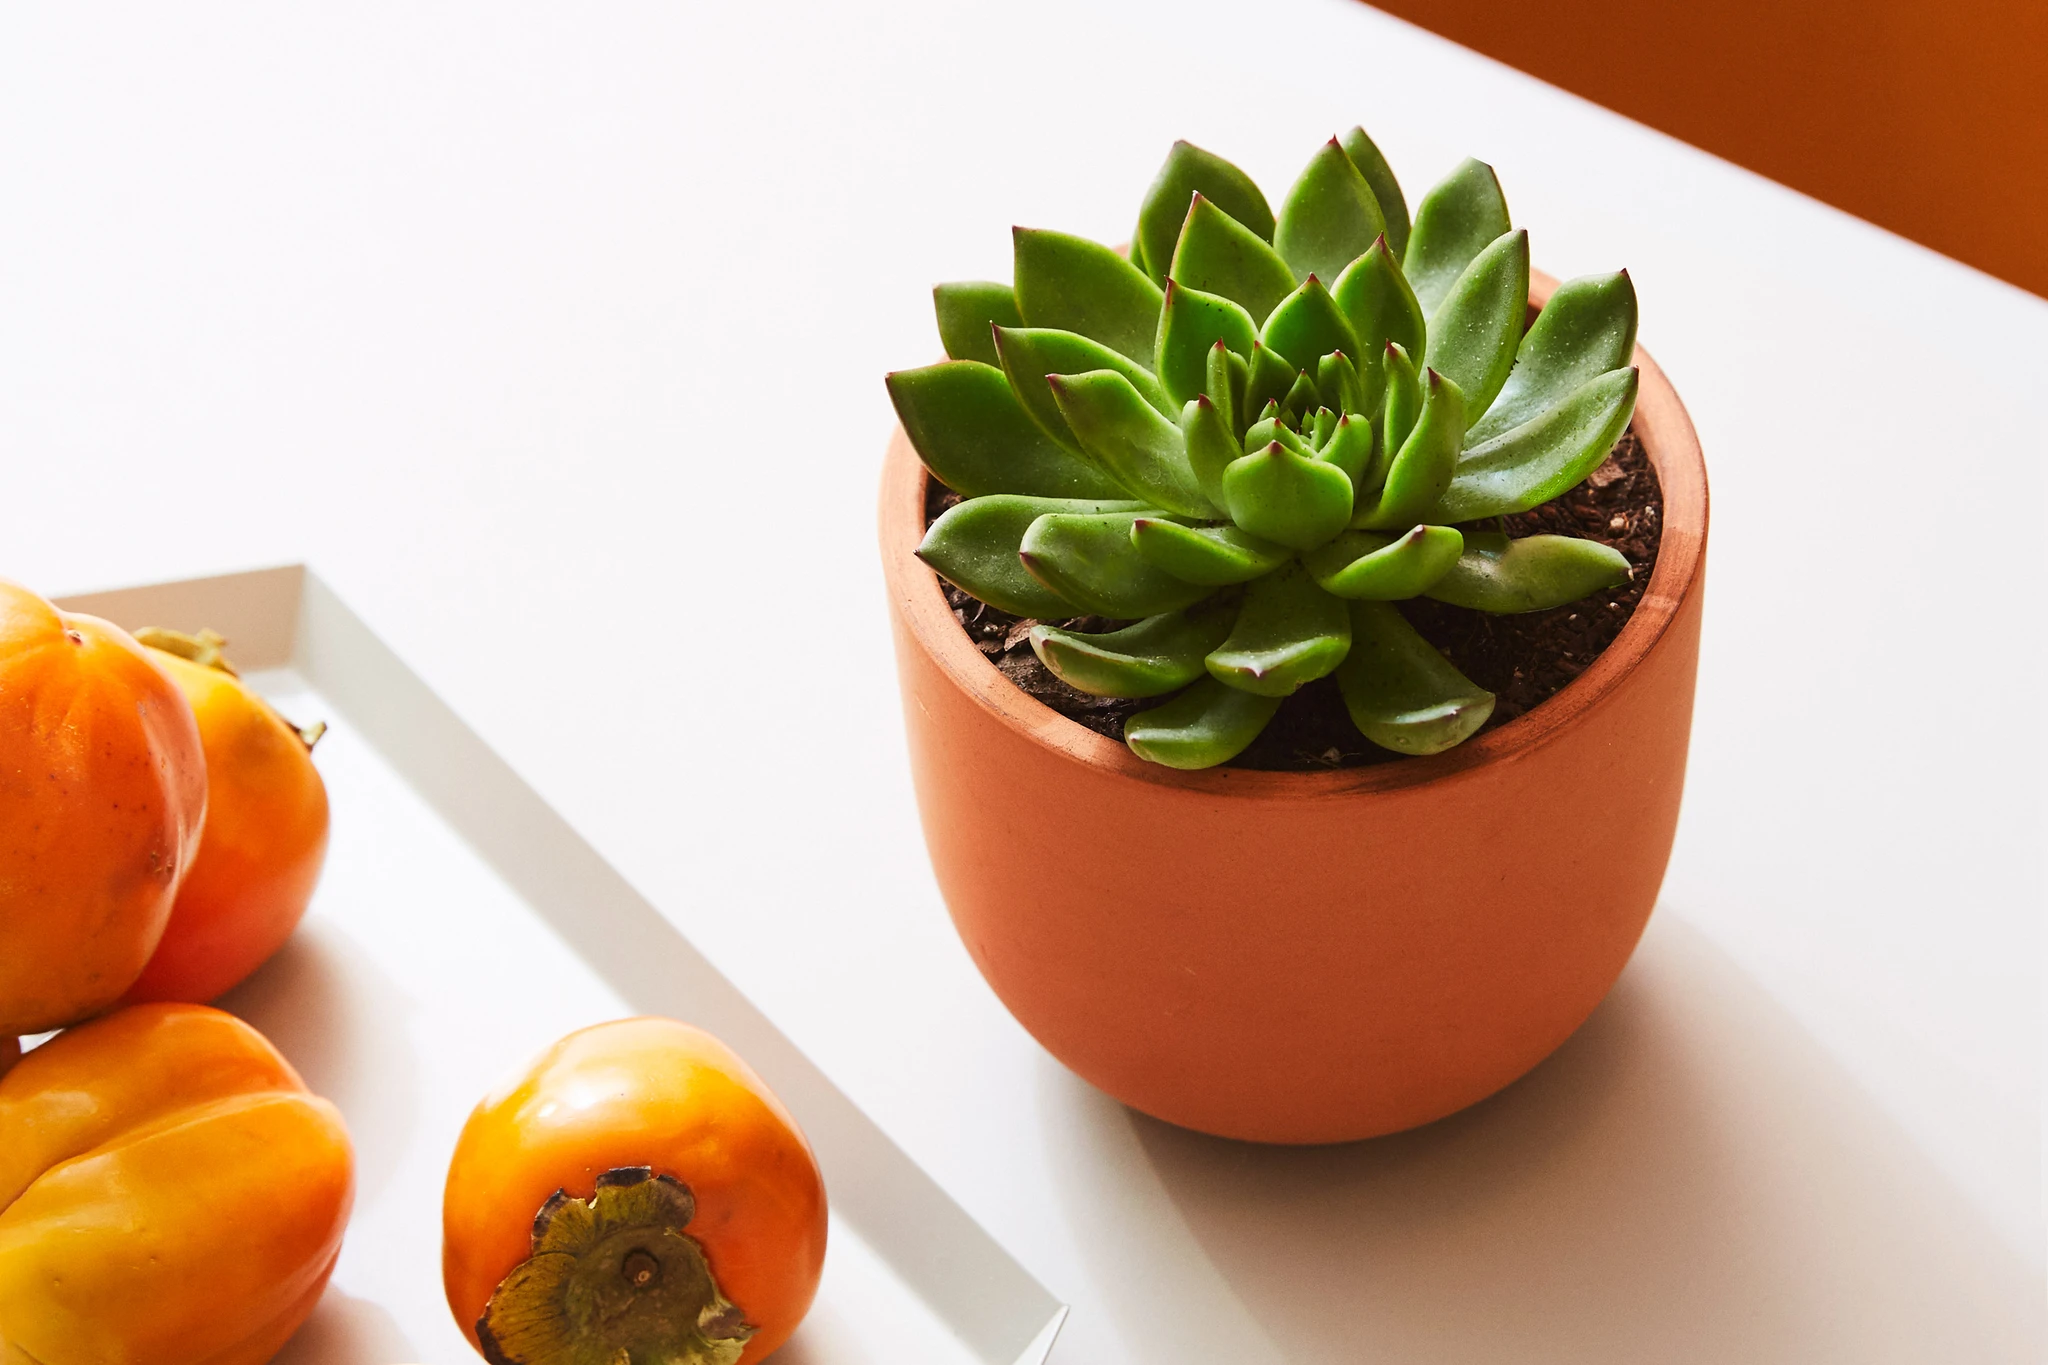 10 Best Office Desk Plants for Working from Home